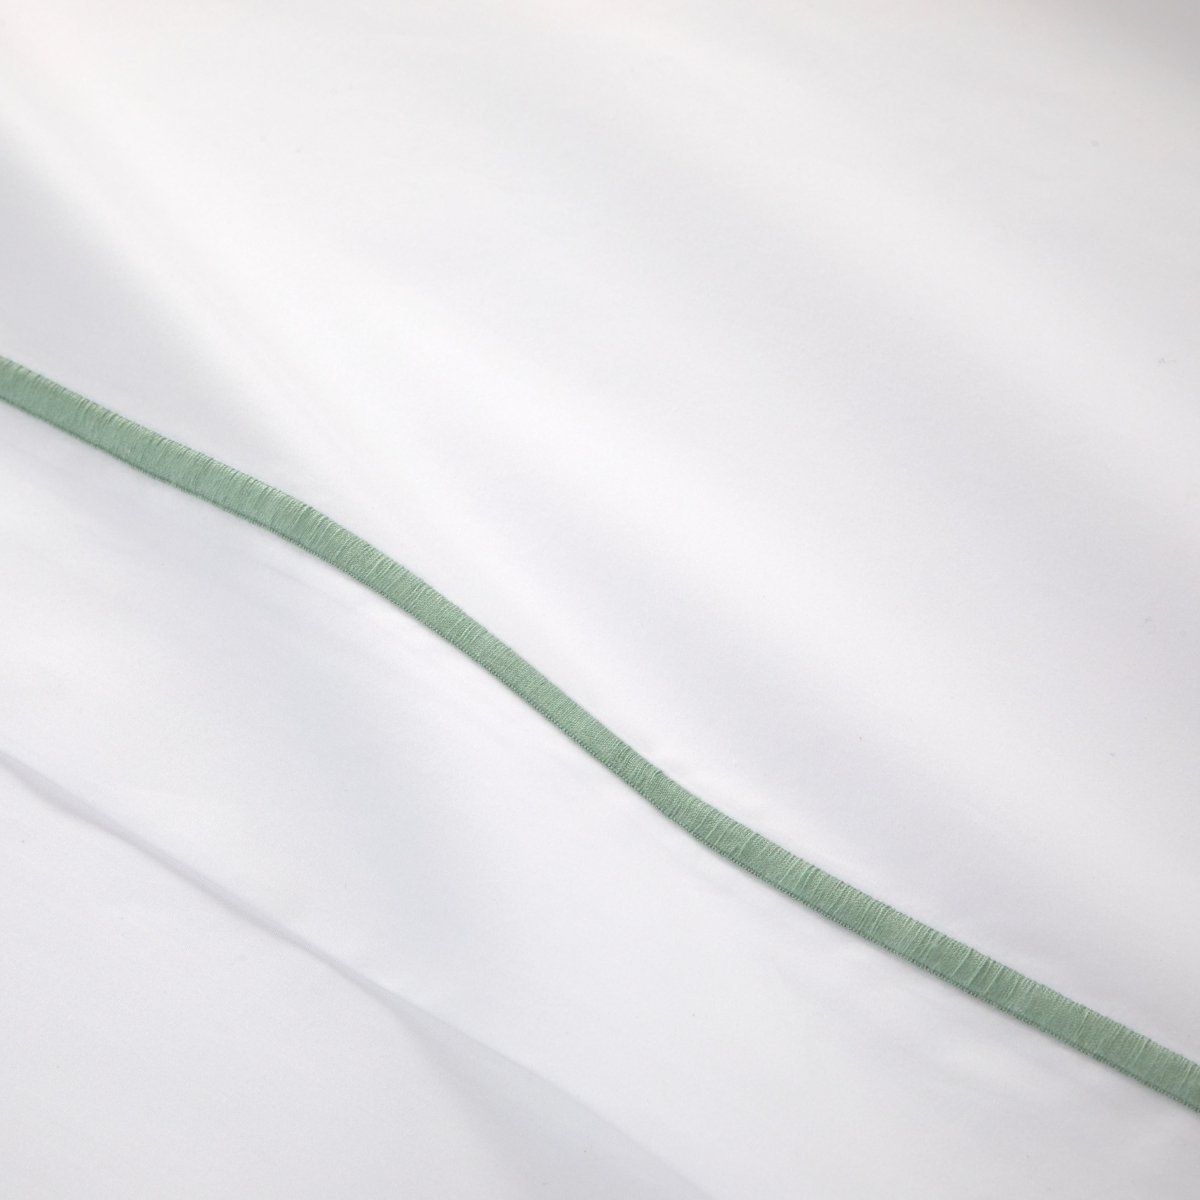 Yves Delorme Stitching Detail  - Athena Veronese Green Organic Percale Bedding